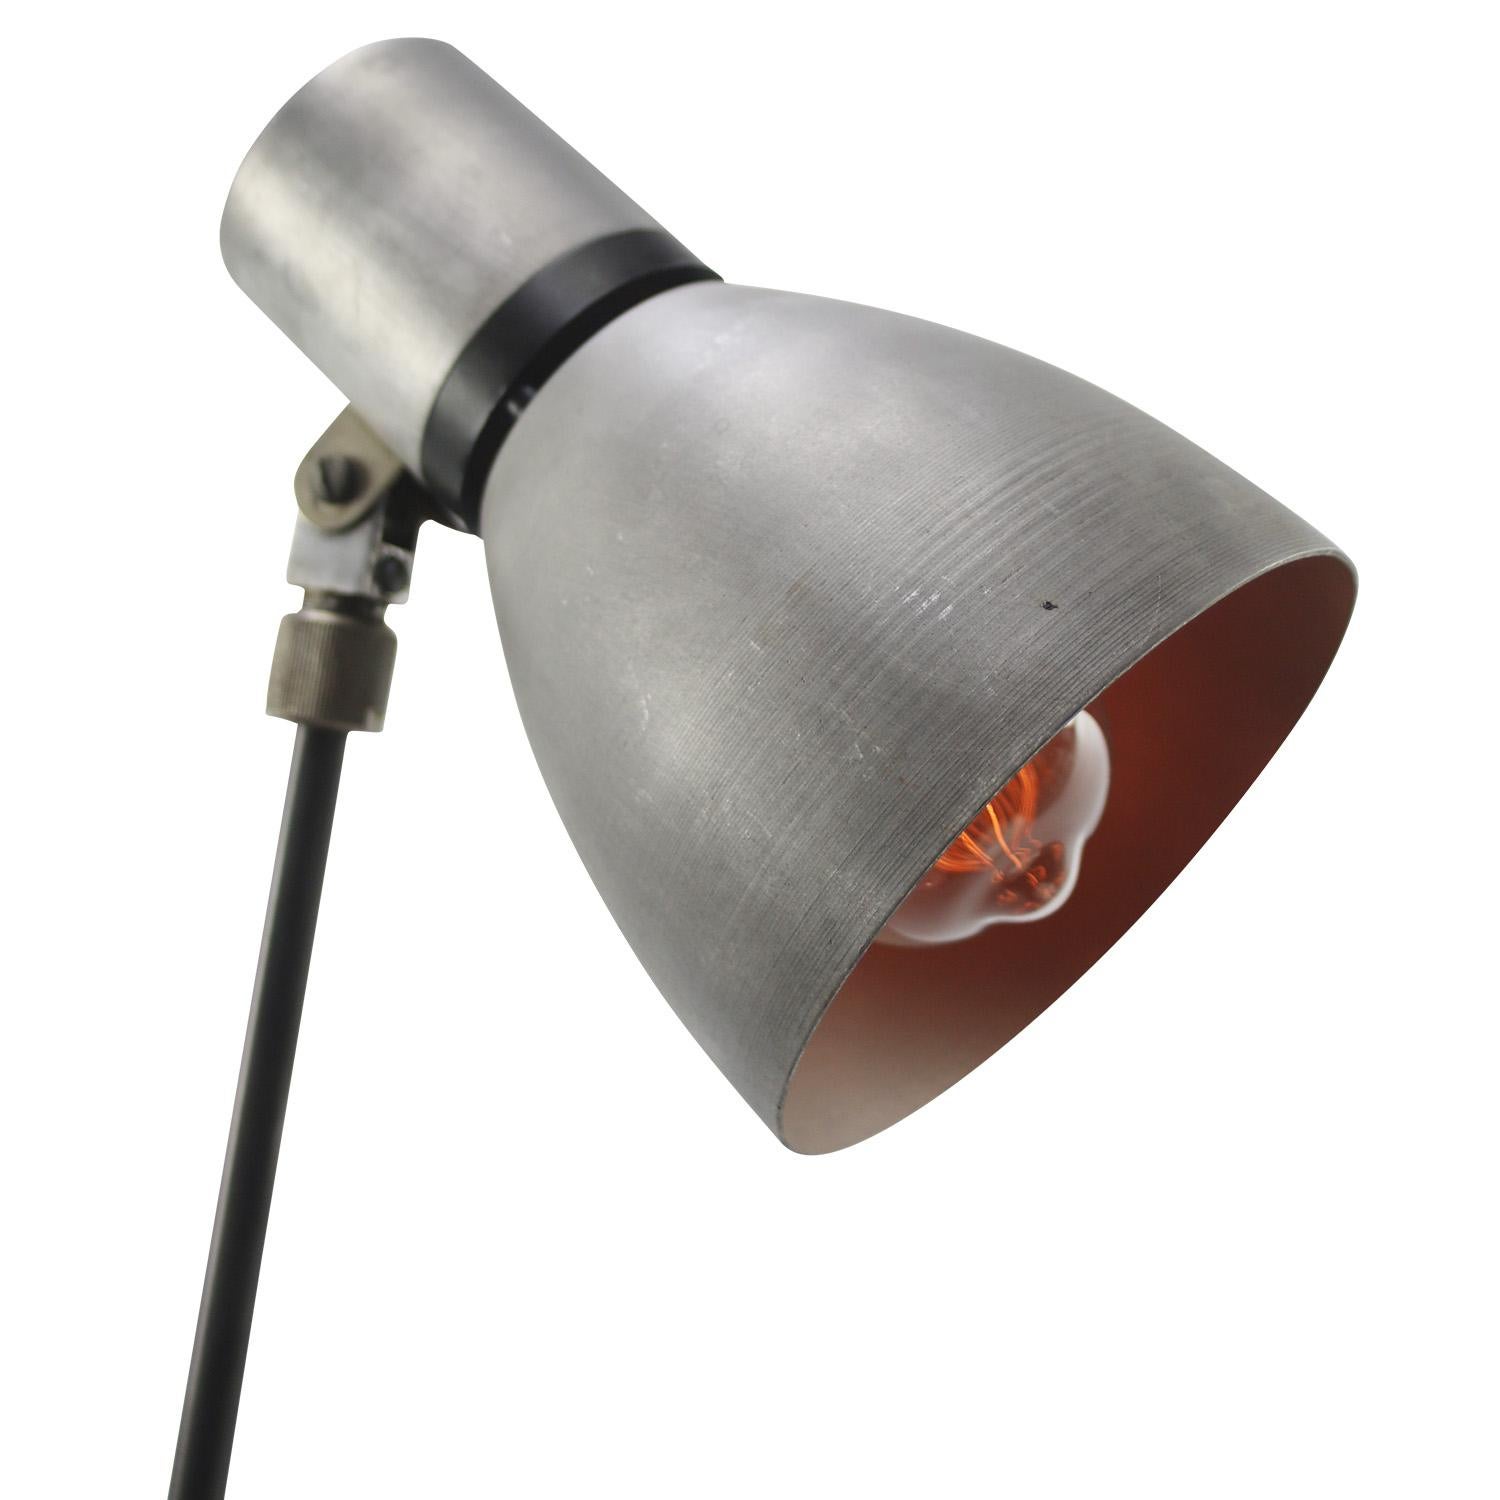 Grey metal industrial 2 arm machinist work light / table lamp.
Adjustable in height and angle
including plug and switch in top of shade

Base size 9 × 9 cm + clamp
Available with UK / US plug

Weight: 1.40 kg / 3.1 lb

Priced per individual item.